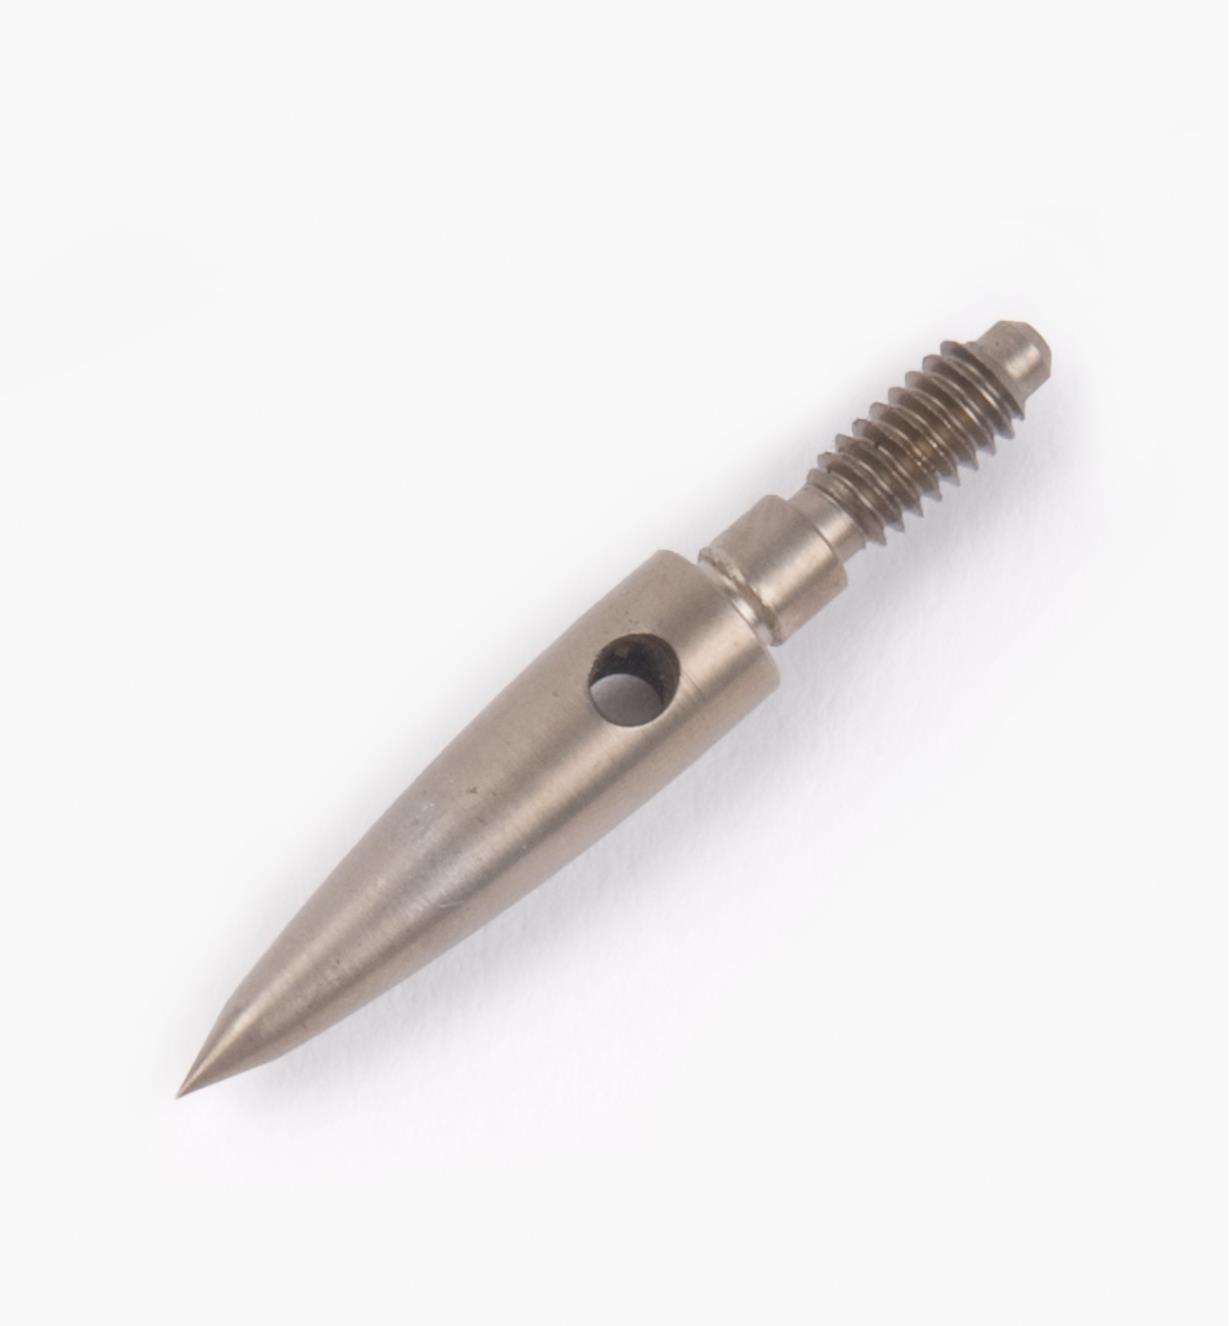 05K6014 - Replacement Tip